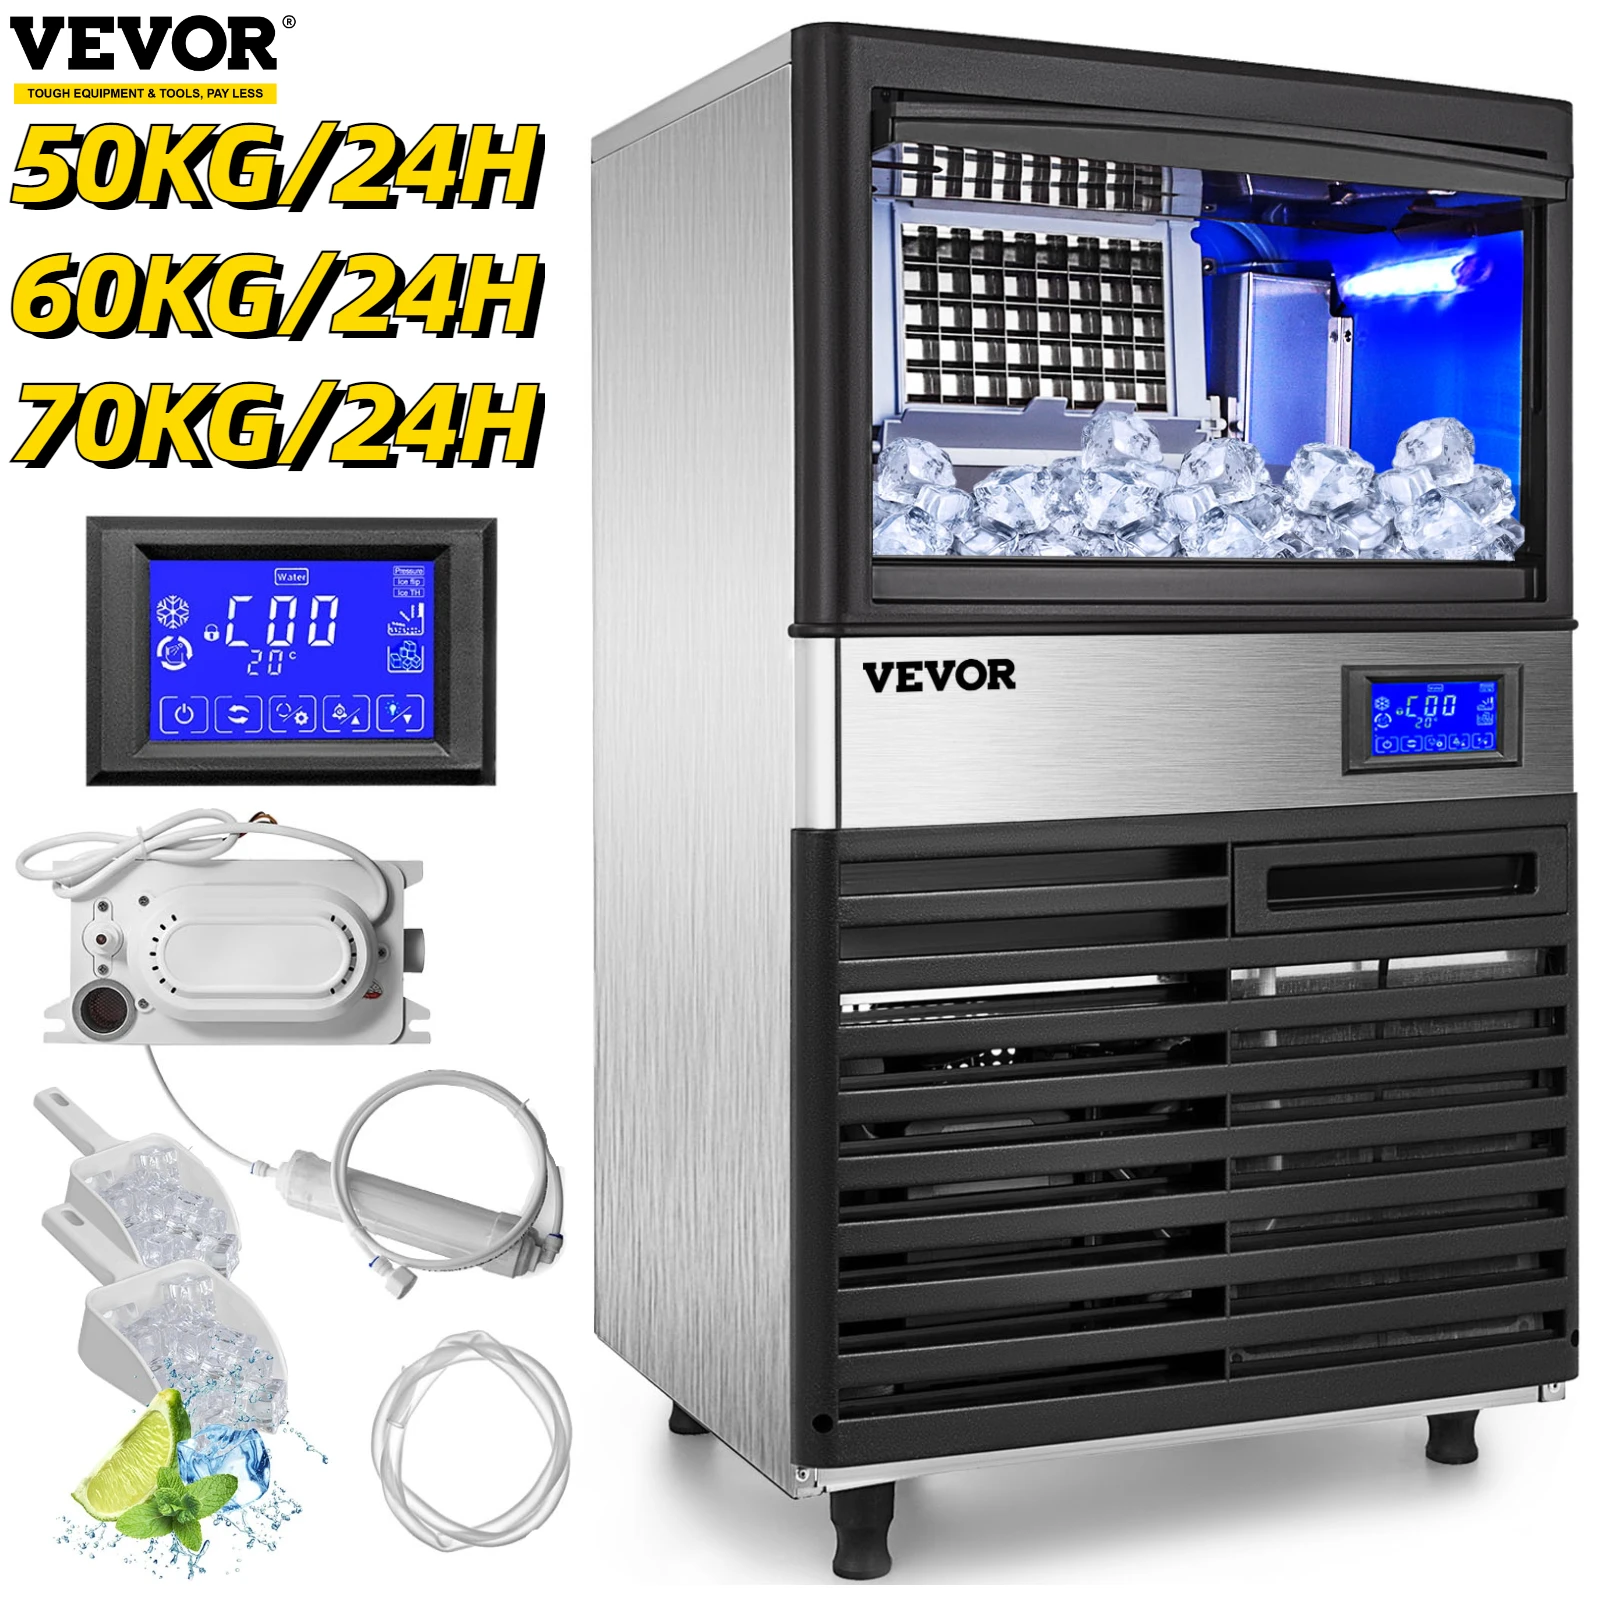 

VEVOR Commercial Cube Ice Maker with Water Drain Pump 50/60/70 KG/24H Freestanding LCD Touch Screen Liquid Freezer Ice Machine